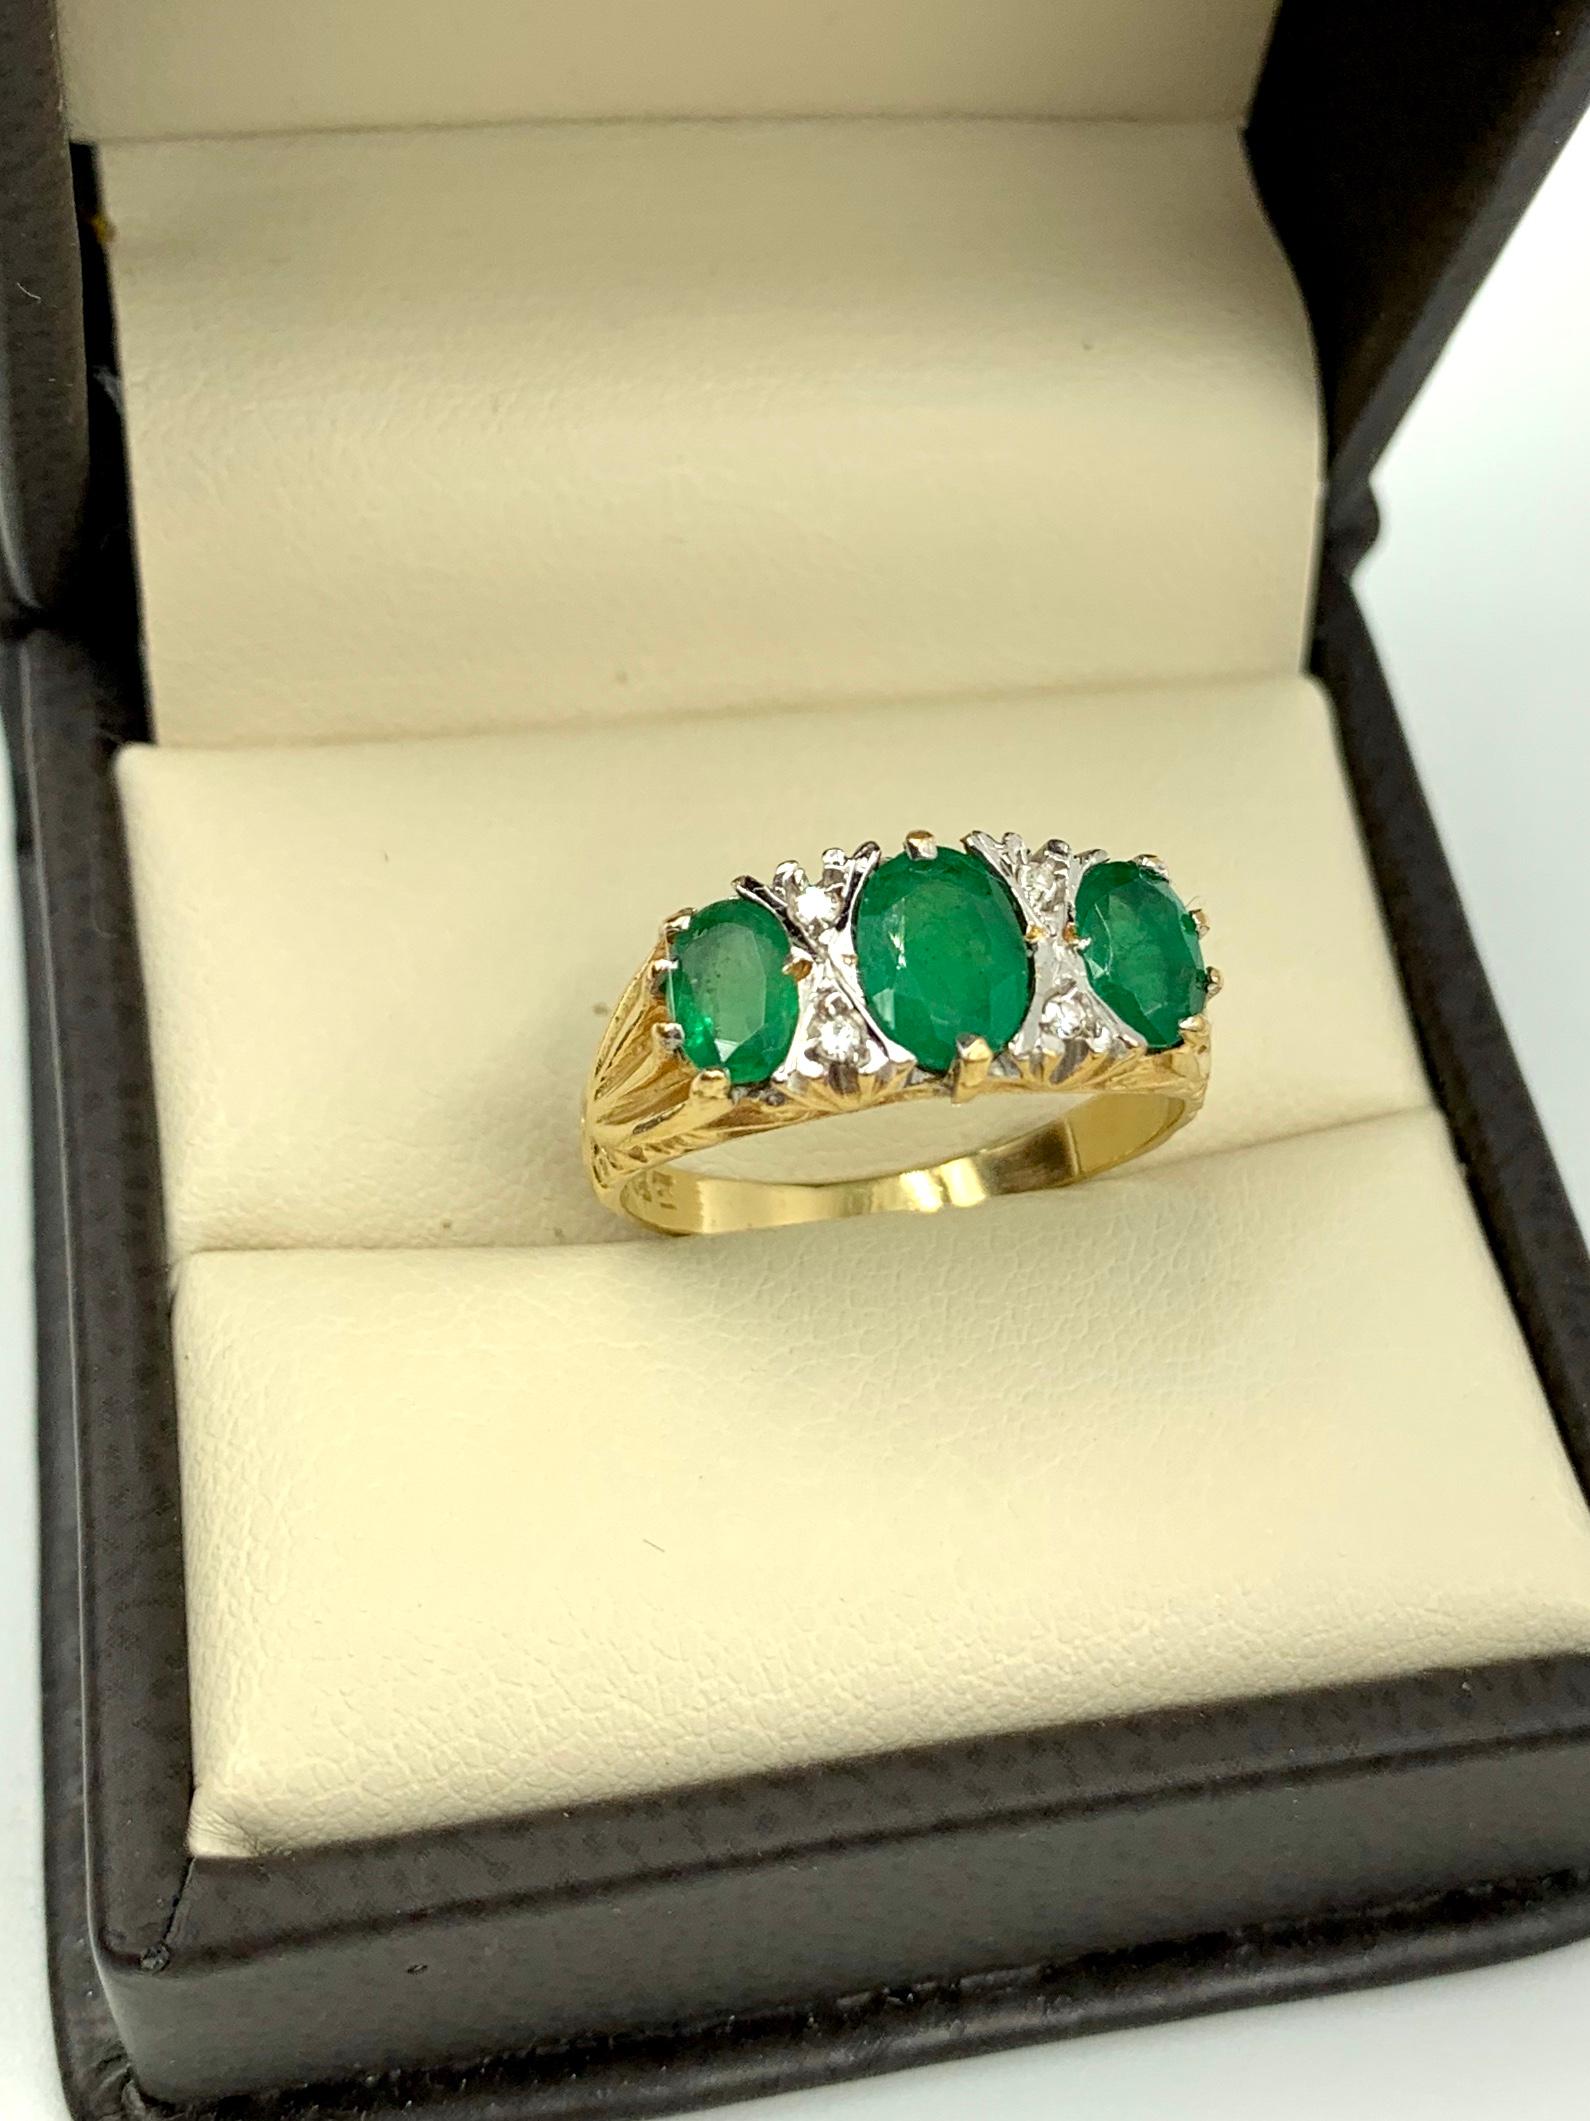 
Center emerald approximately 1 carat, the two flanking emeralds .5 carats each with four diamonds surrounding the center stone in an X formation, the whole forming OXOXO. Lovely gold scroll details at the top and bottom of the setting.
Marks: 18